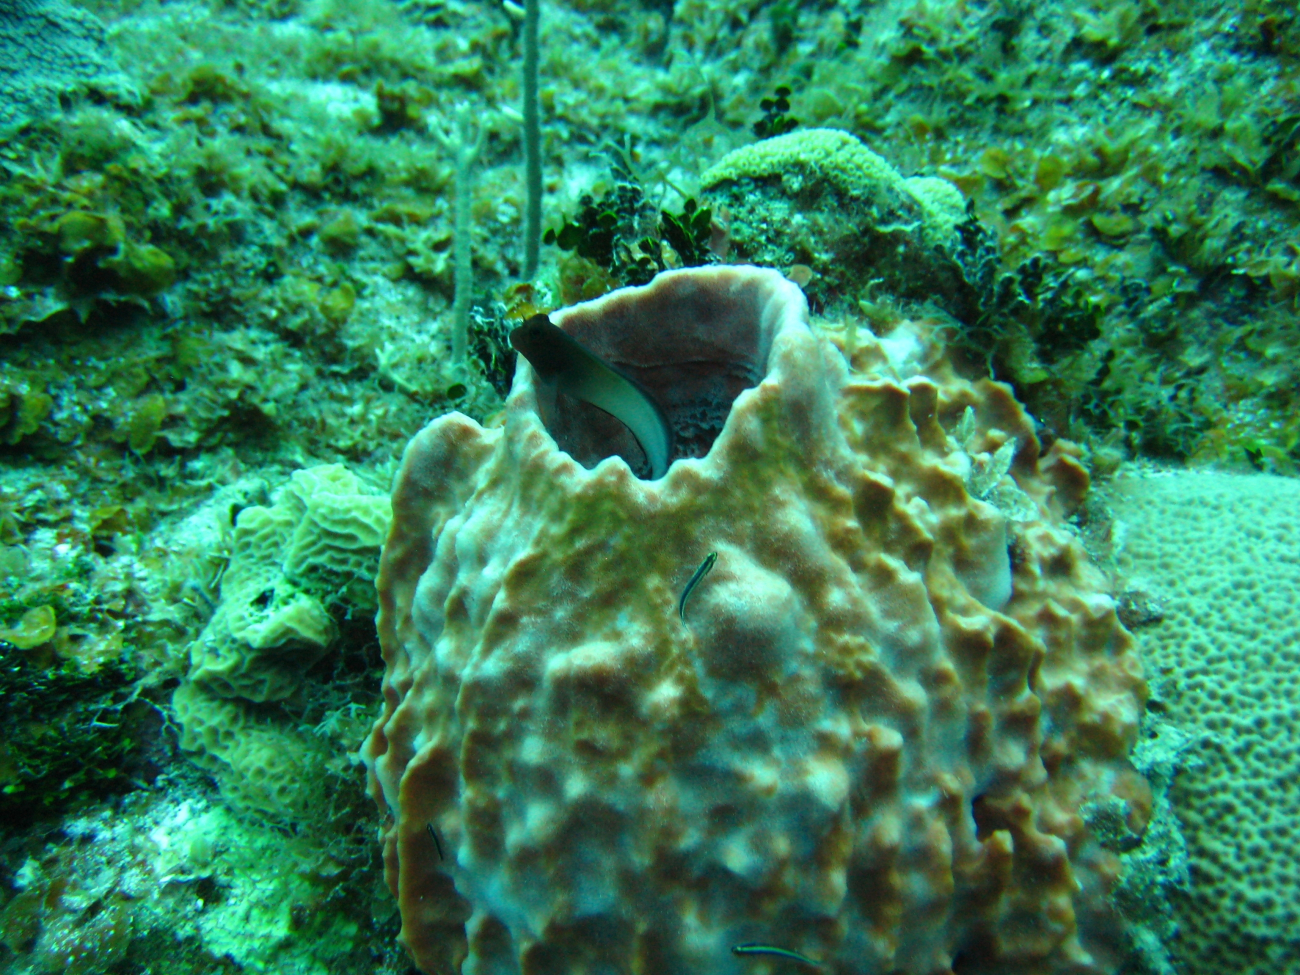 A barrel sponge being used as a refuge by a small fish